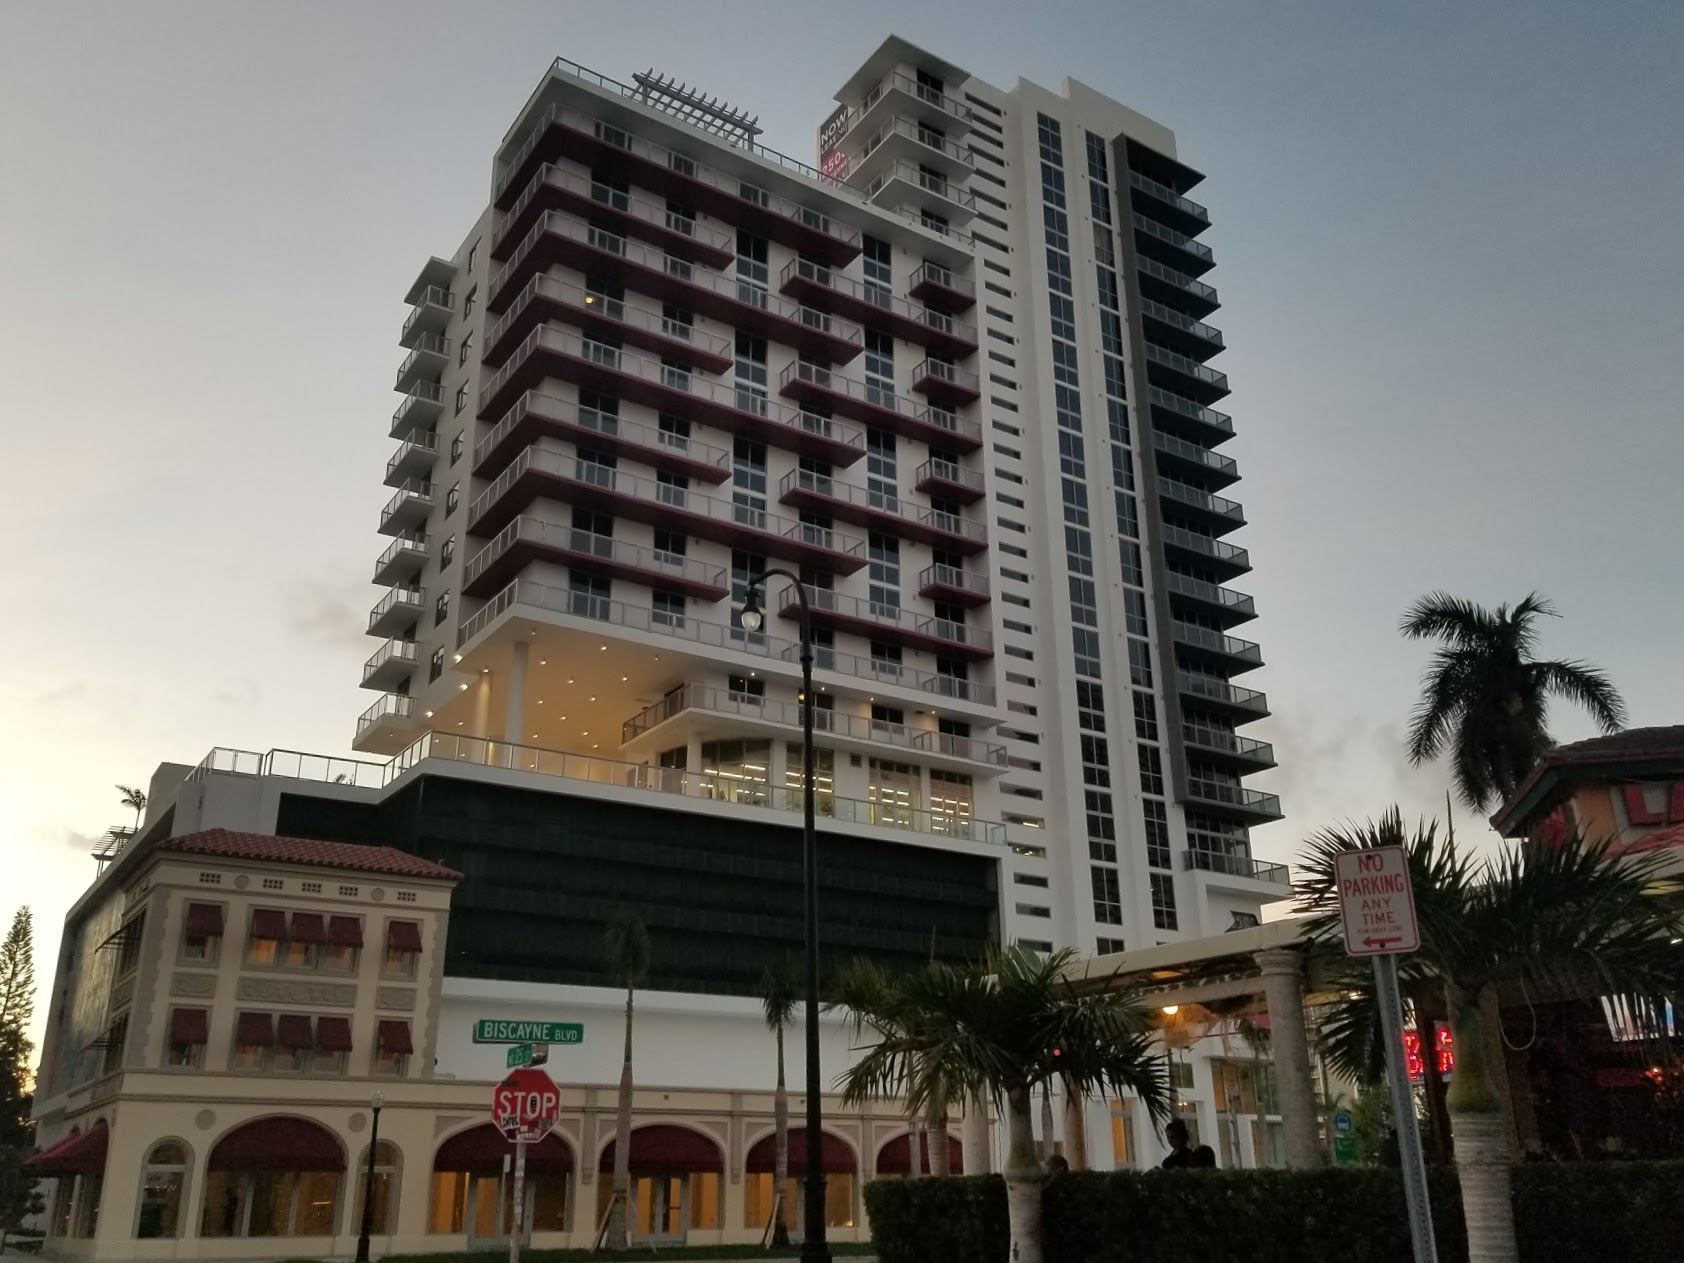 20+ Story Tower Planned At 2501 Biscayne In Edgewater With 250 Apartments